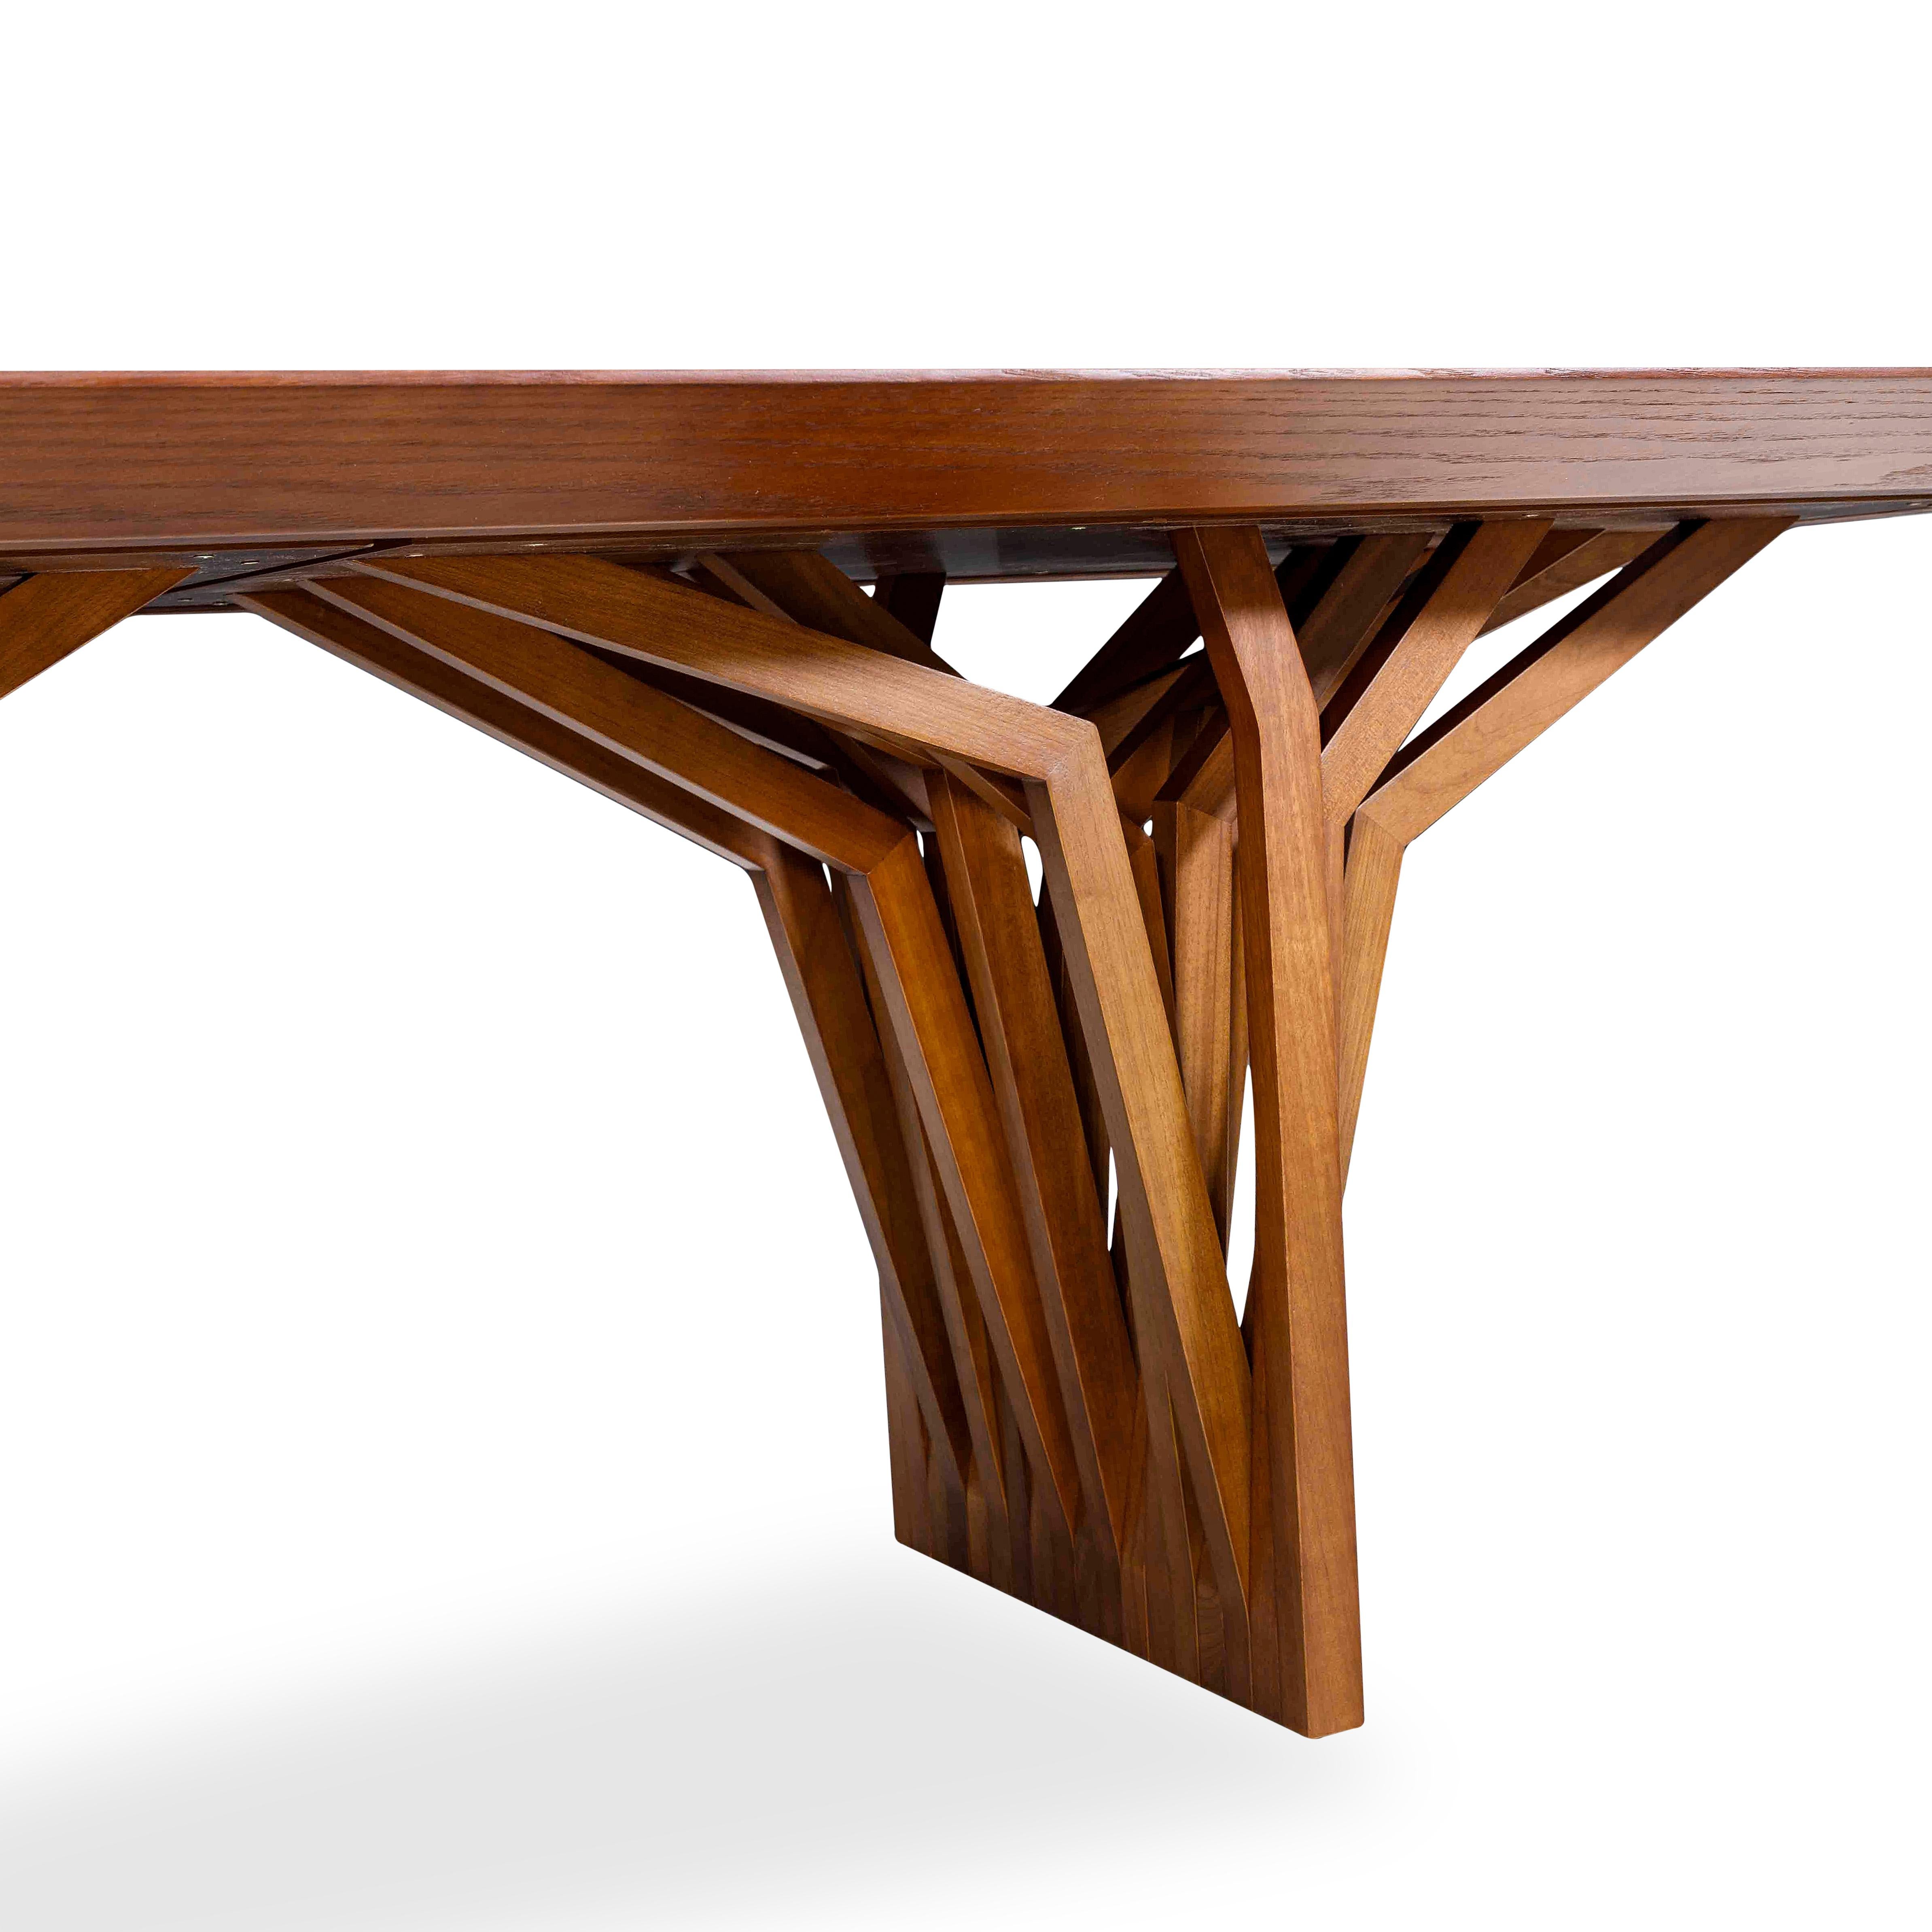 Contemporary Radi Dining Table with Almond Oak Wood Veneered Table Top 98'' For Sale